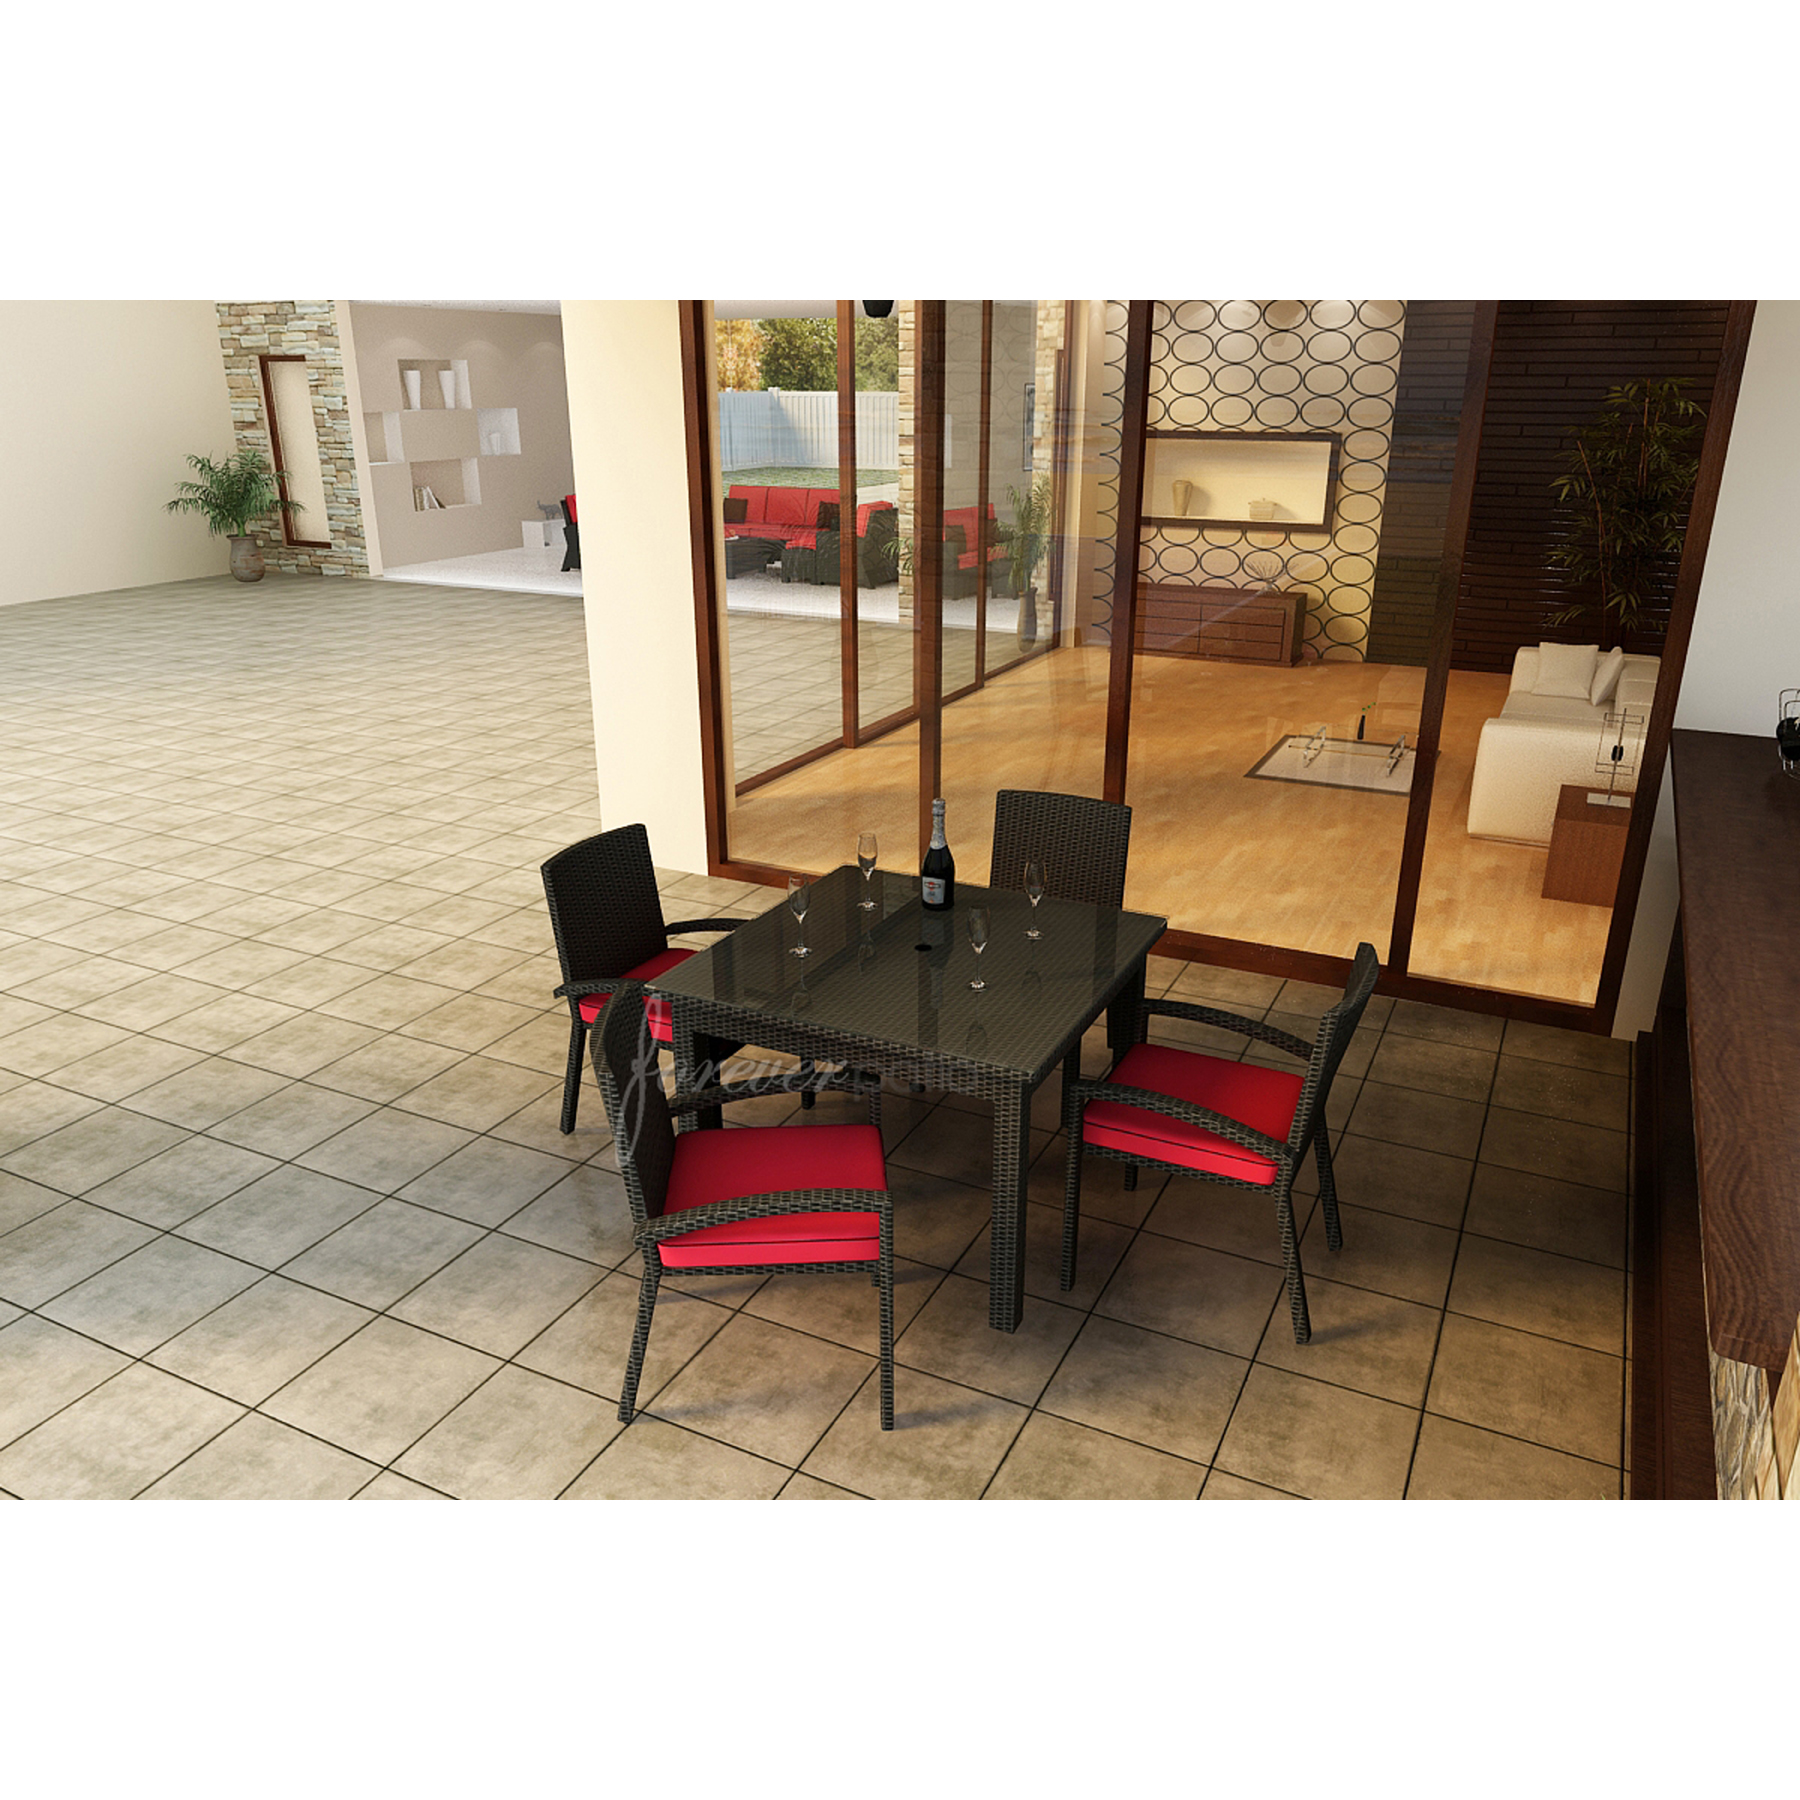 Barbados 5pc Square Patio Dining Set featuring Sunbrella&reg; Fabric in Flagship Ruby